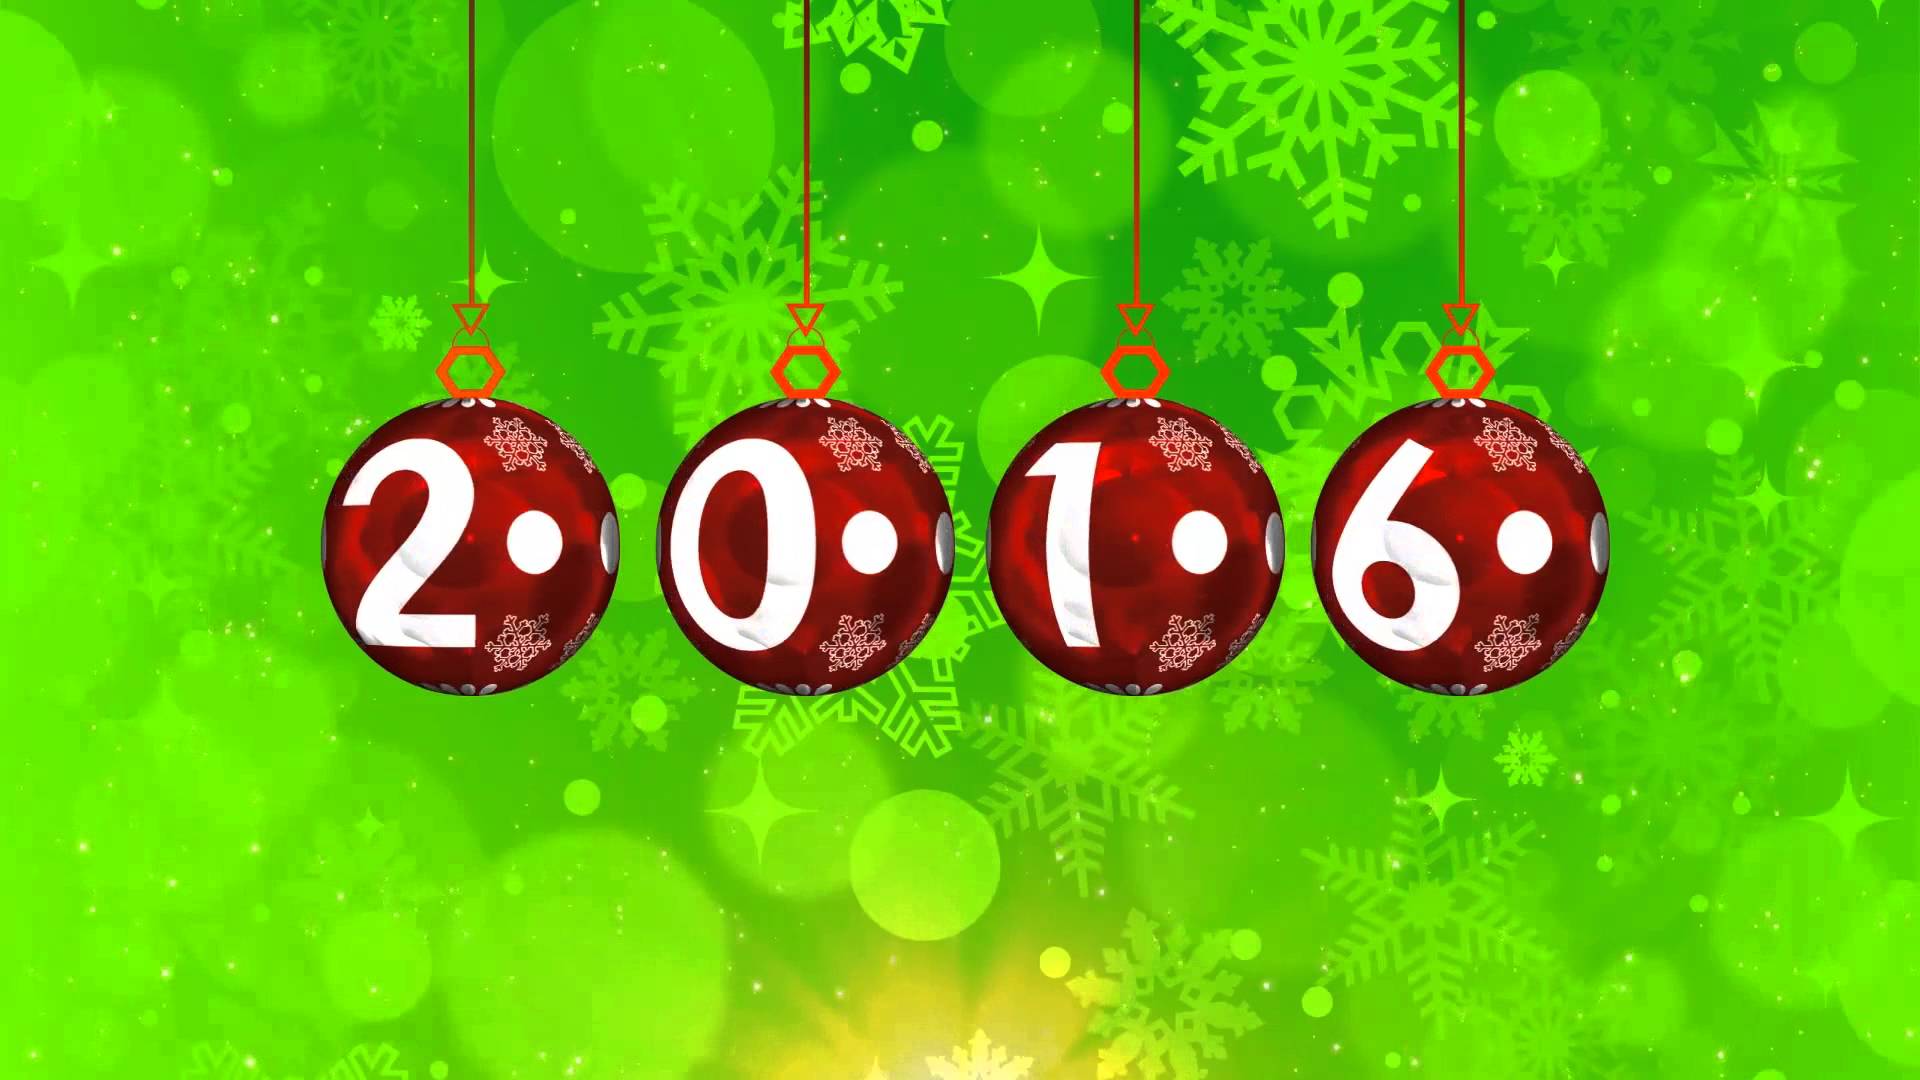 2015 to 2016 Christmas Balls New Year- Green Screen Footage - YouTube